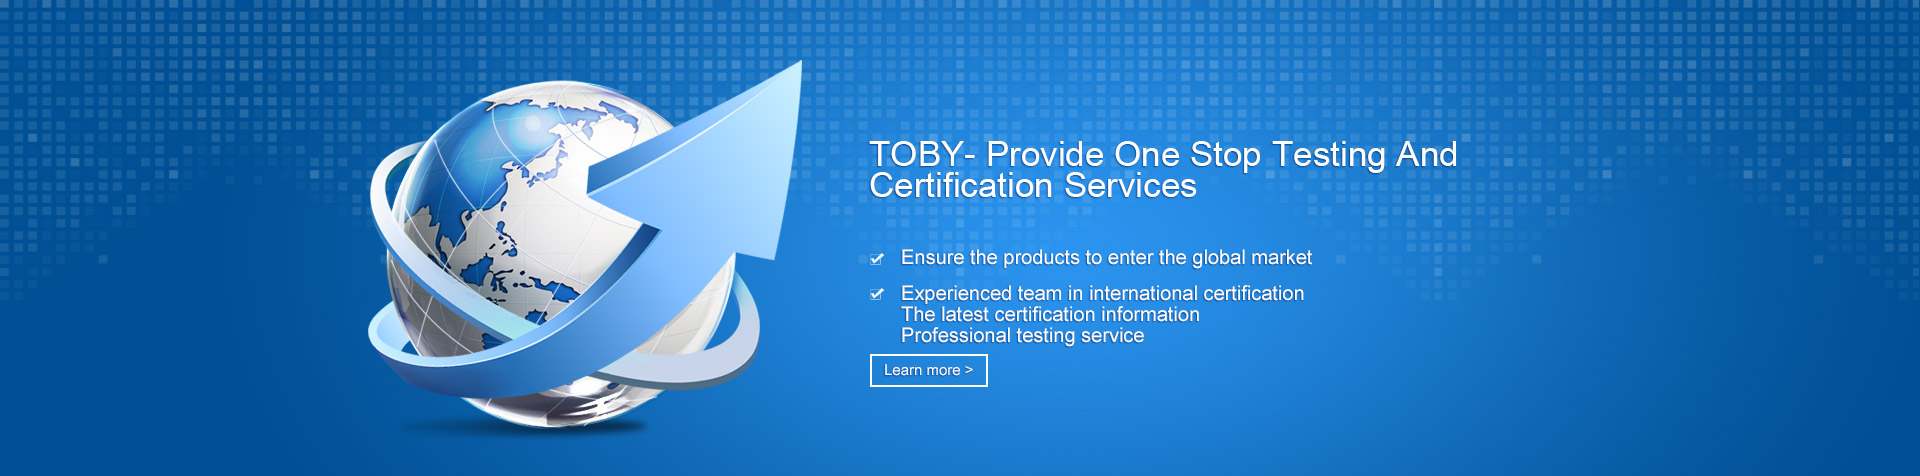 TOBY-stop testing and certific